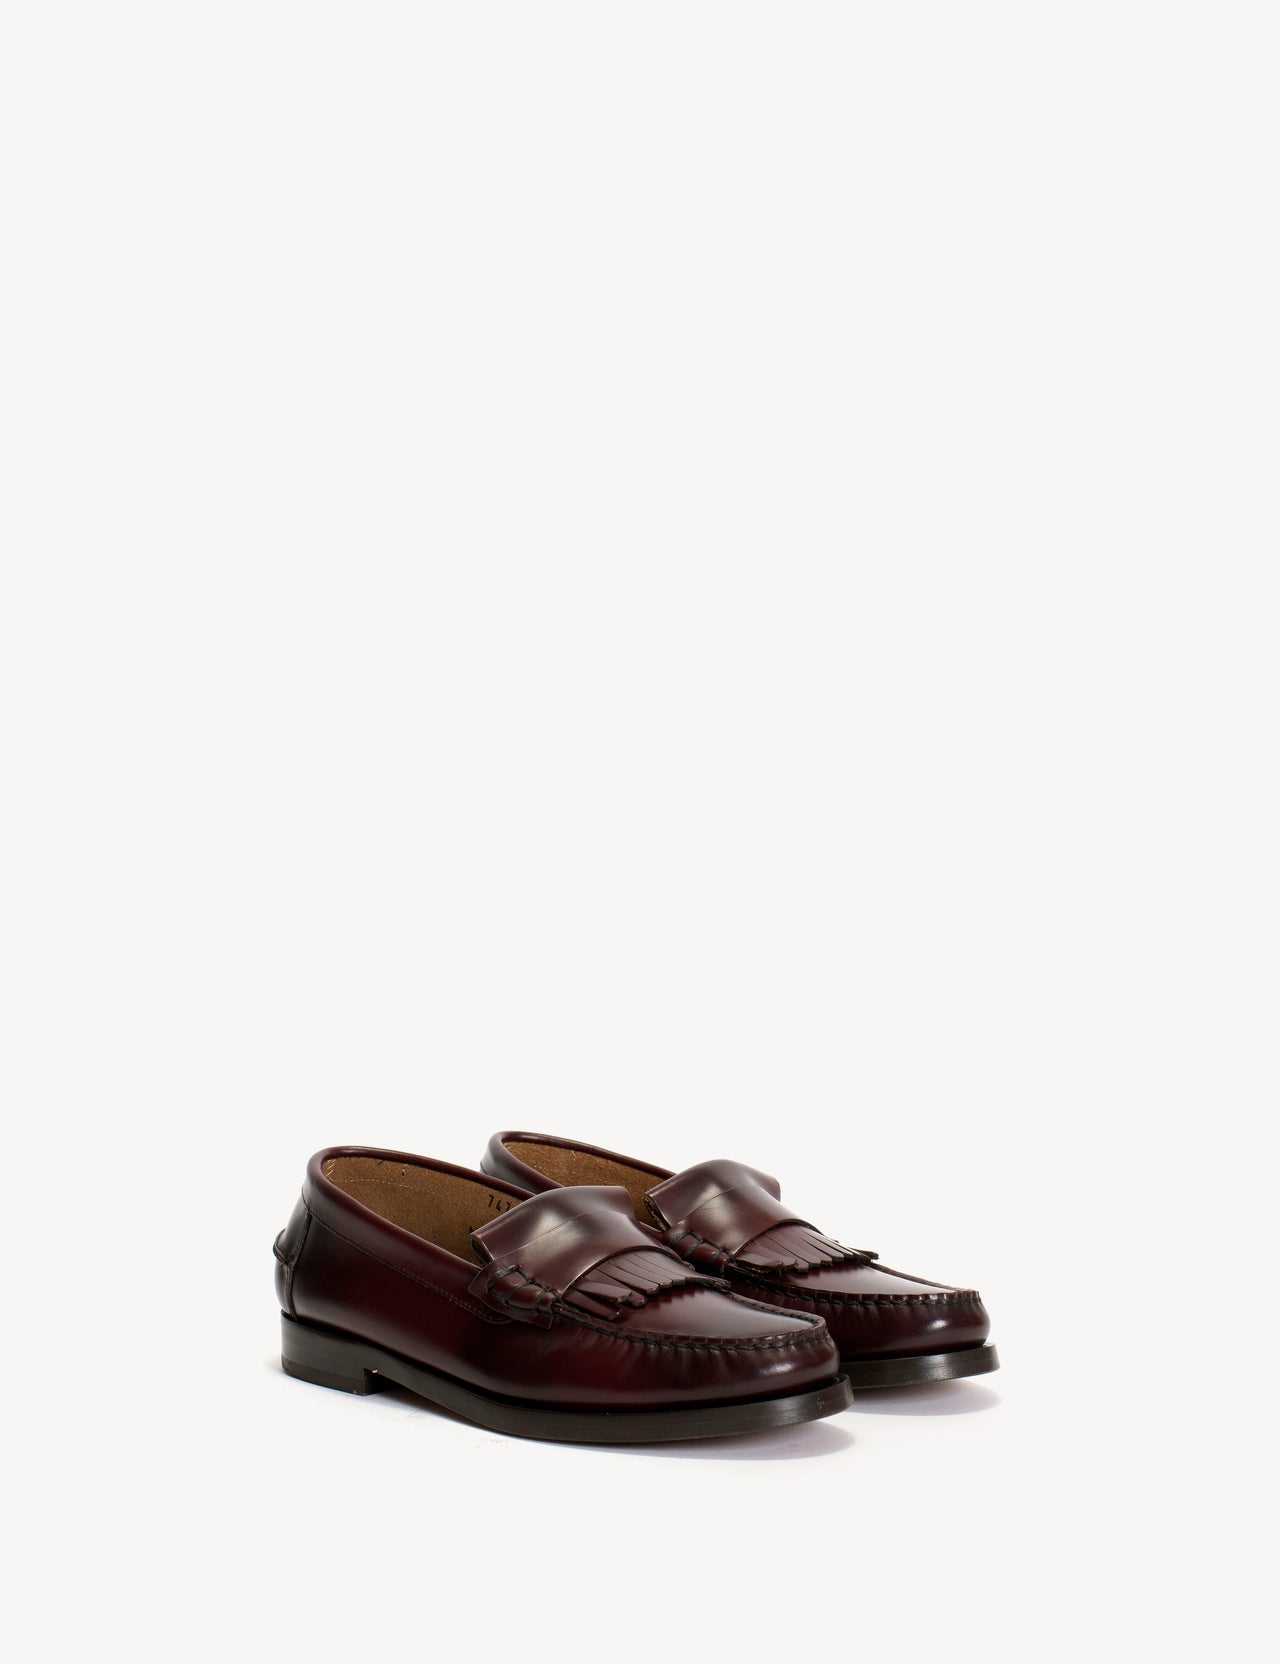 Moccasin Loafer With Fringes In Bordeaux Polido Leather